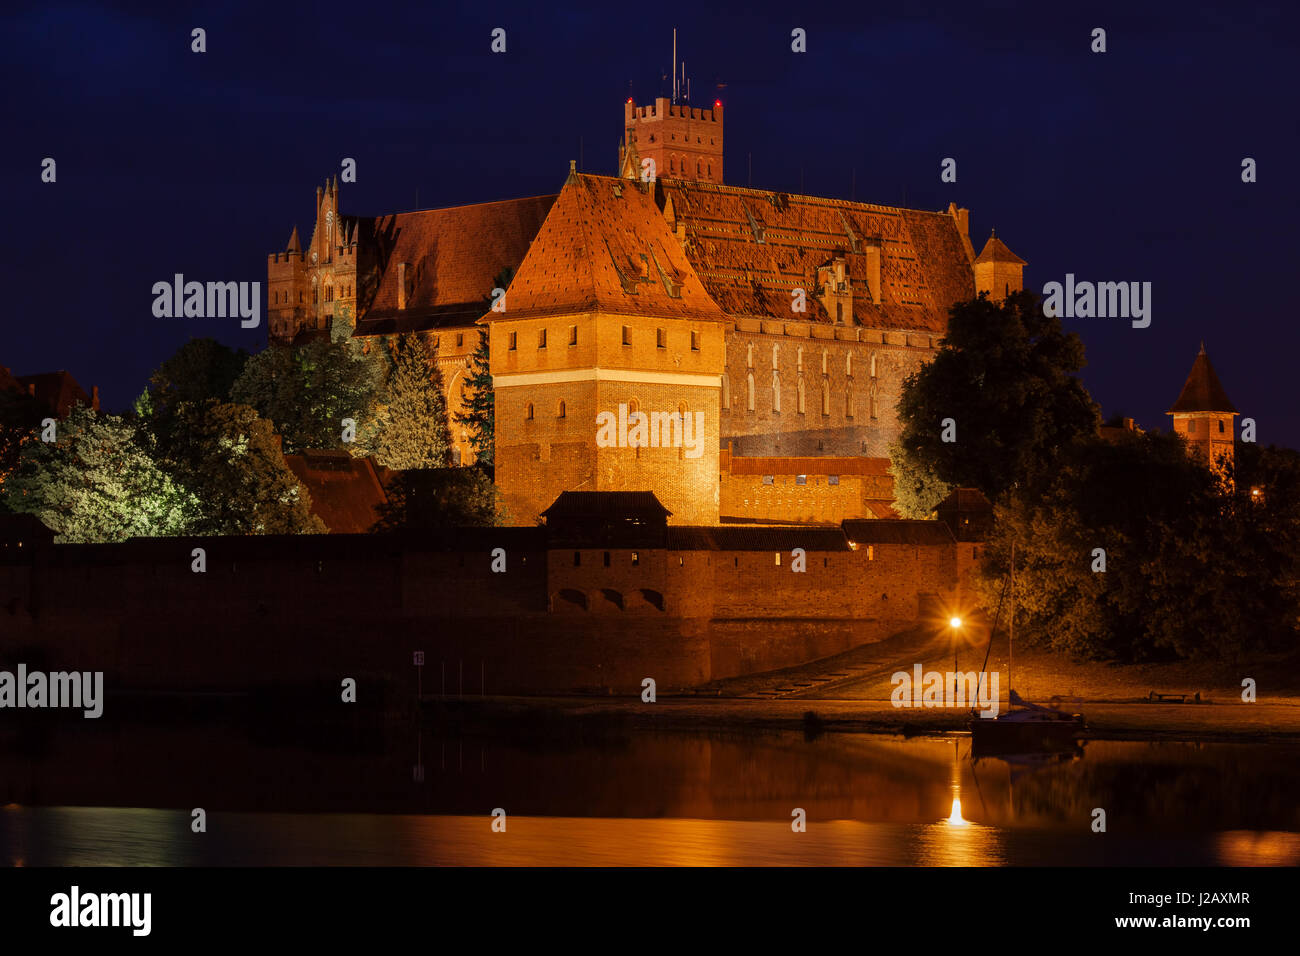 Malbork Castle (Marienburg) at night in Poland, Europe, High Castle, medieval architecture of the Teutonic Knights Order, UNESCO World Heritage Site Stock Photo